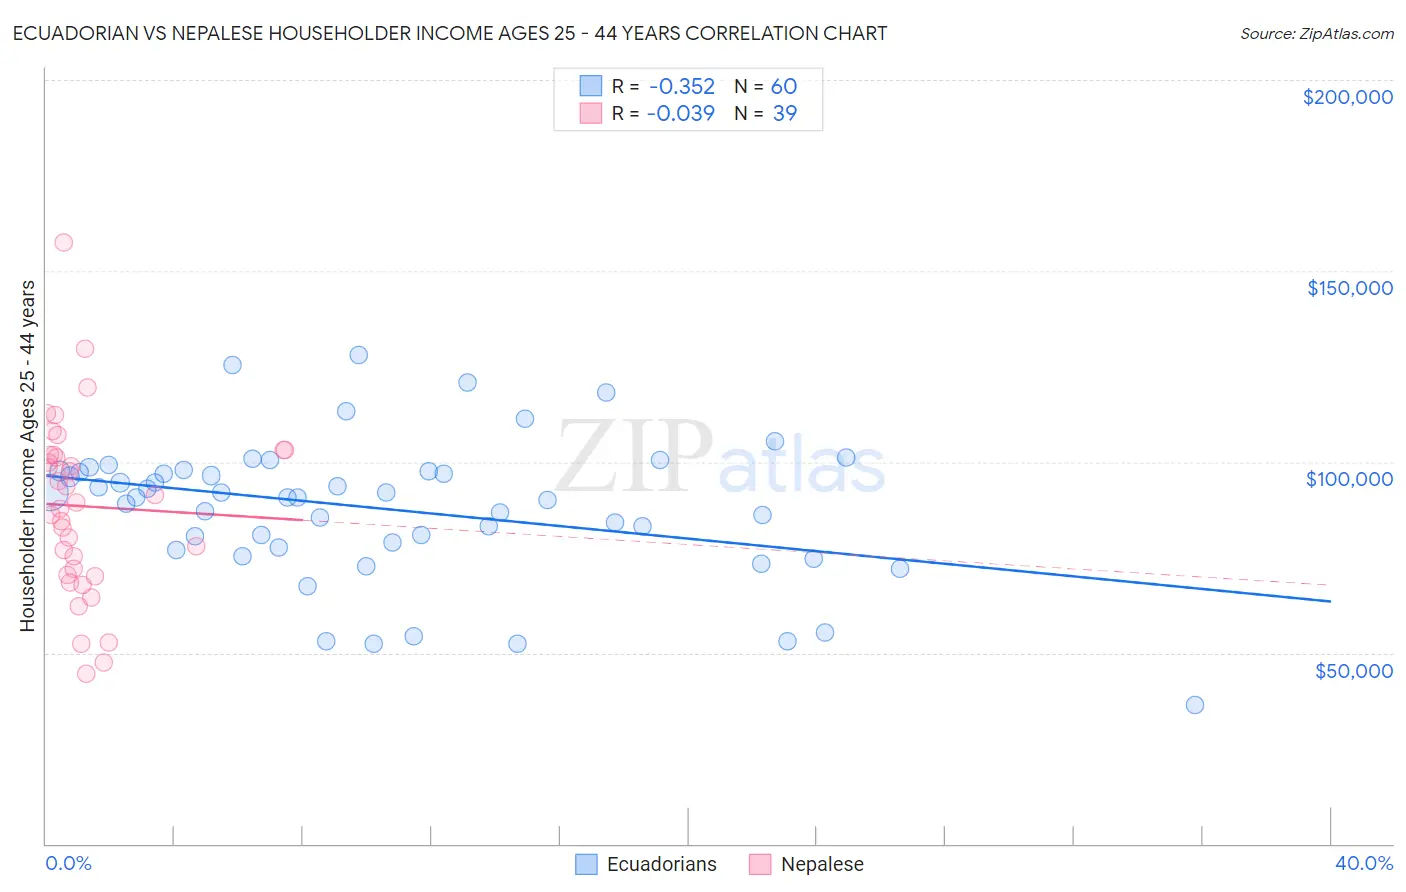 Ecuadorian vs Nepalese Householder Income Ages 25 - 44 years